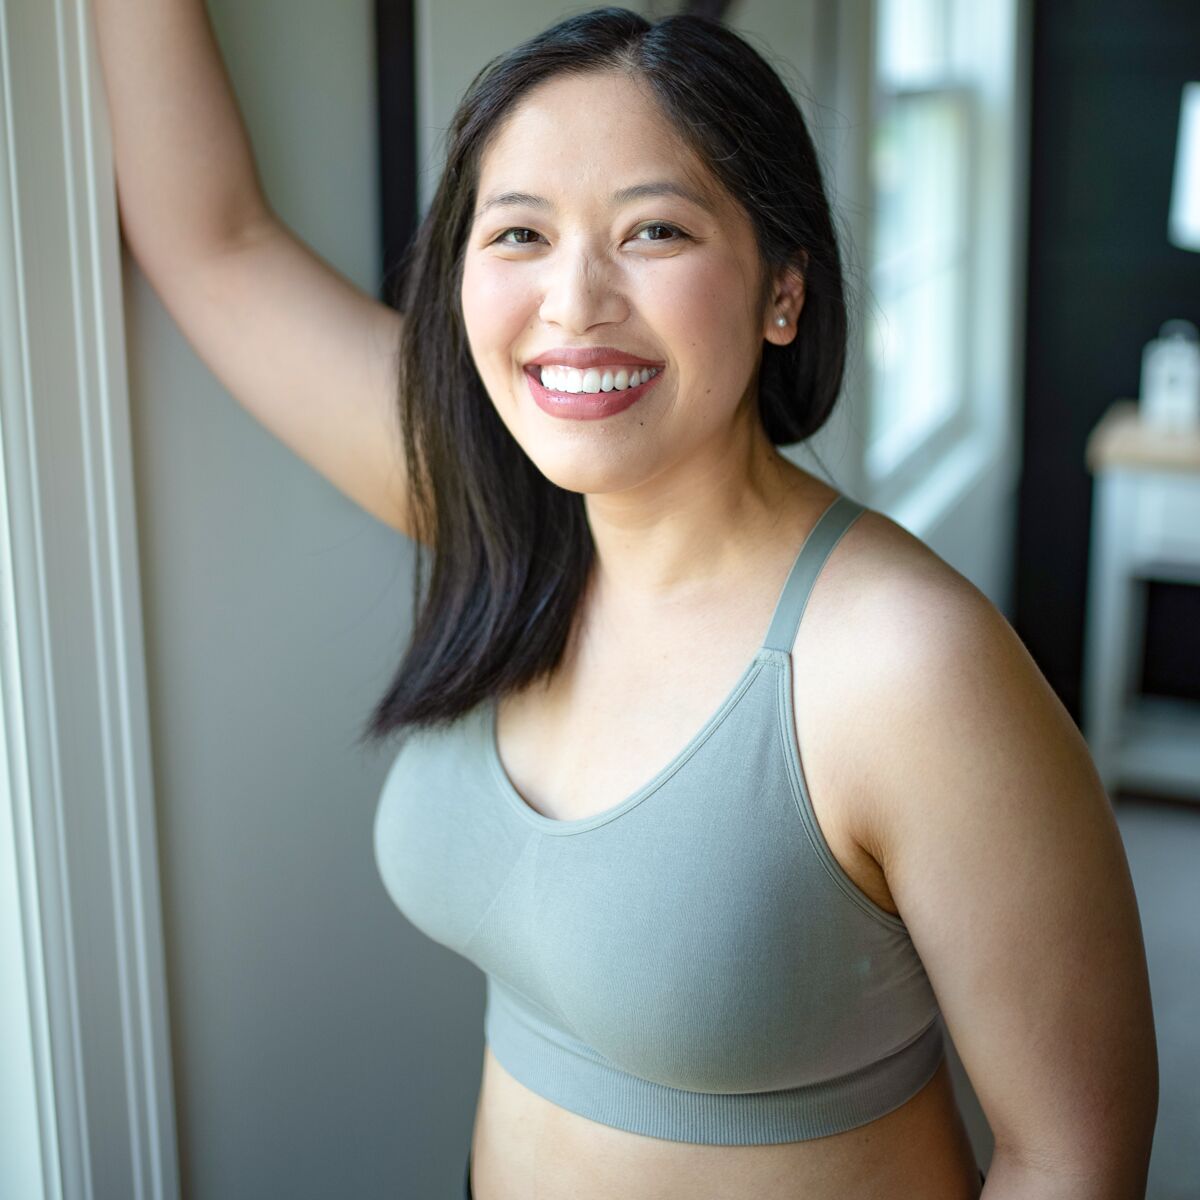 Super Strappy (NN) Bra Fit Guide – Bamboobies